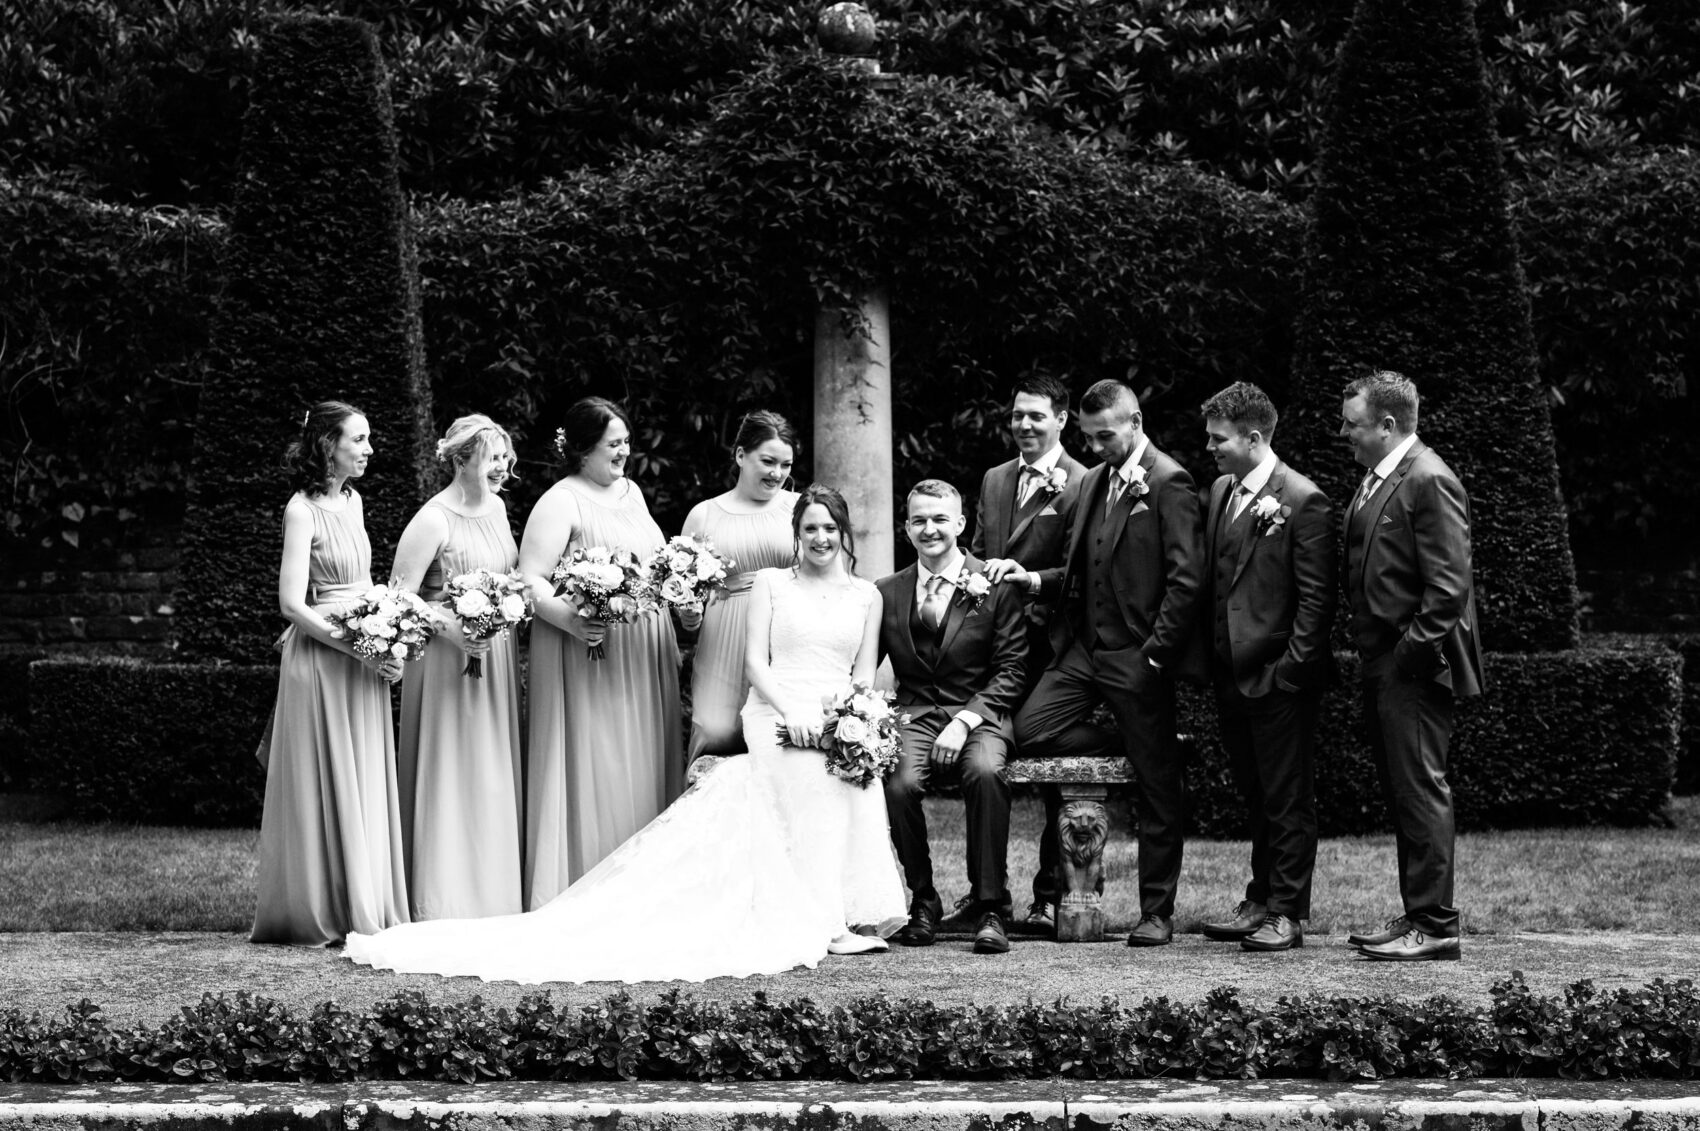 Bridal party pose together at The Italian Villa in Poole